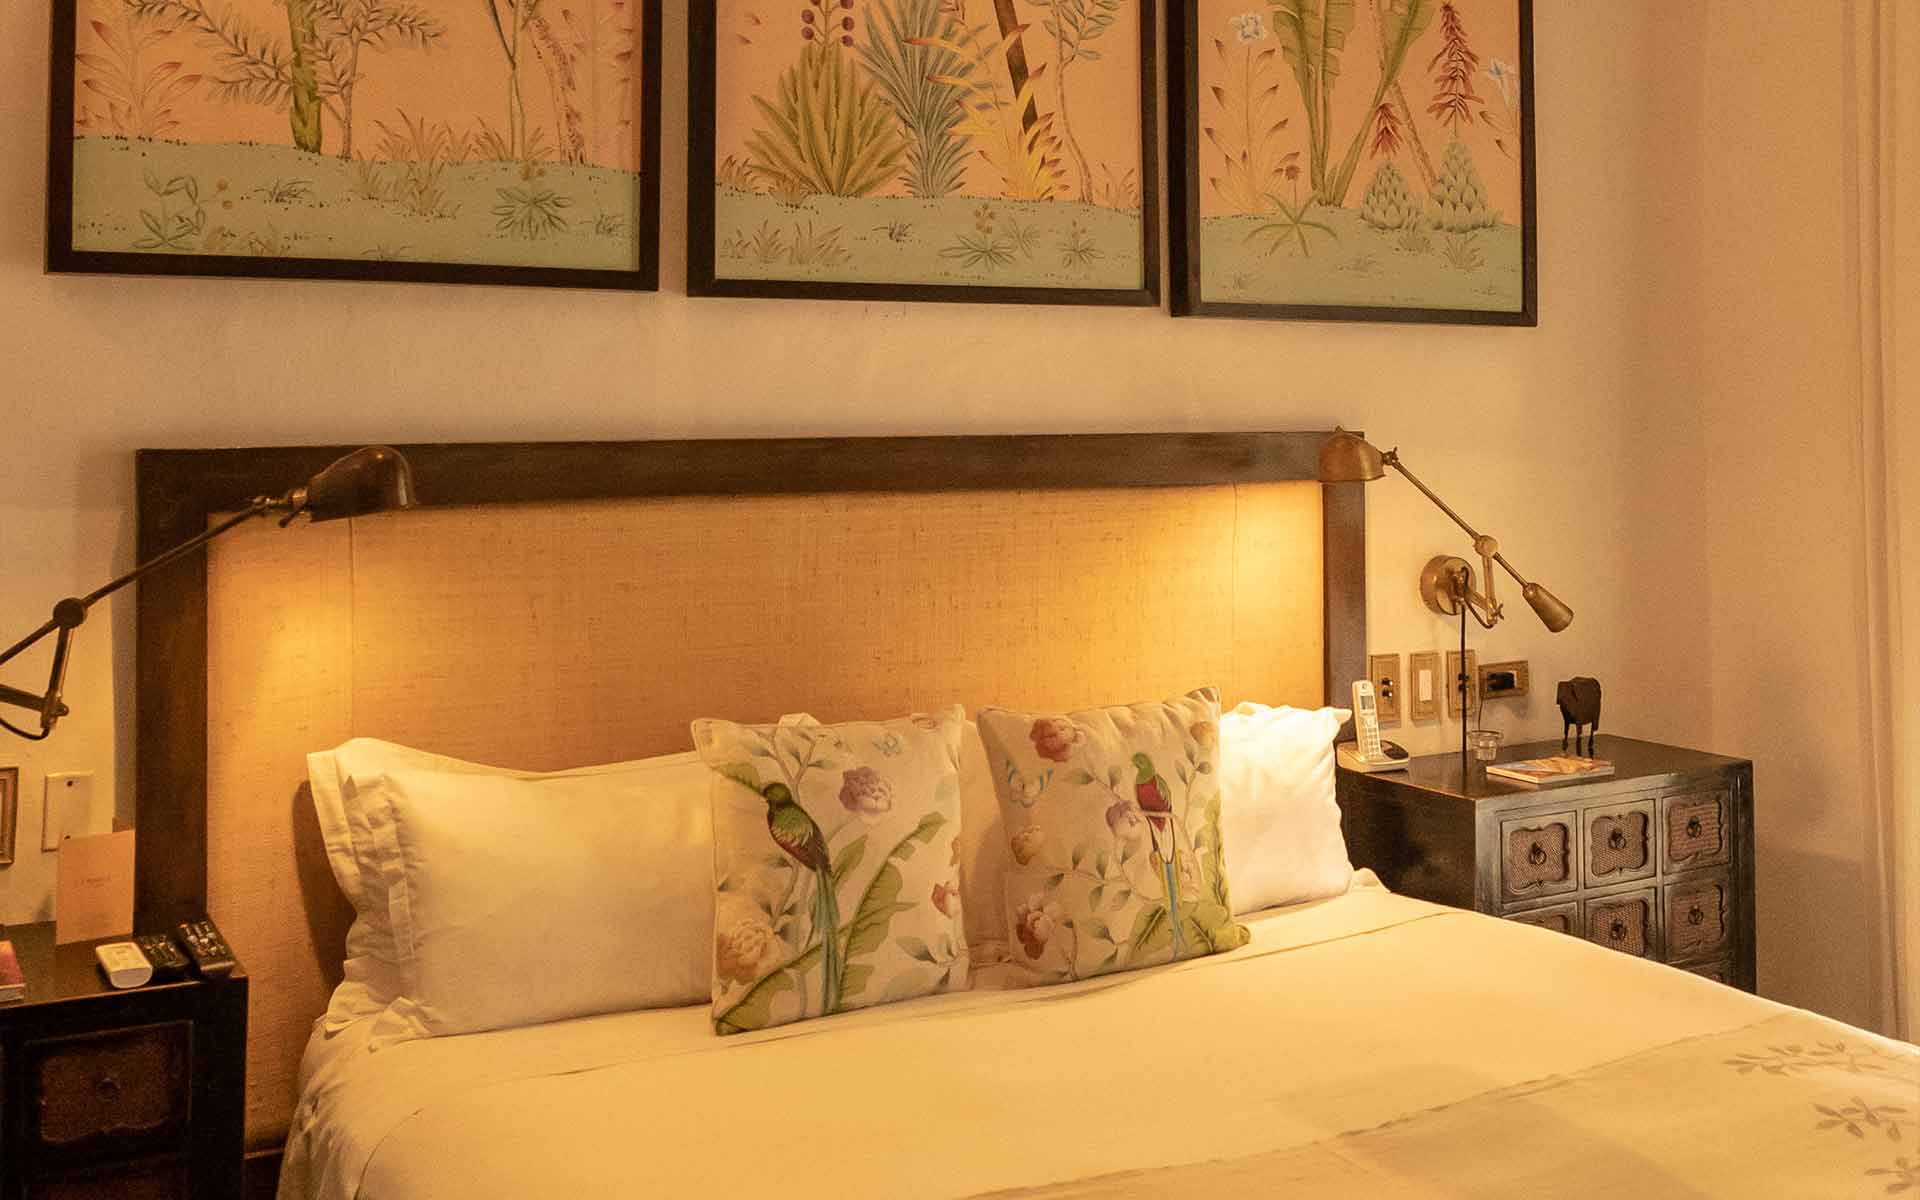 Quetzal Room with king size bed and De Gournay panels and pillows depicting tropical botanical scenes